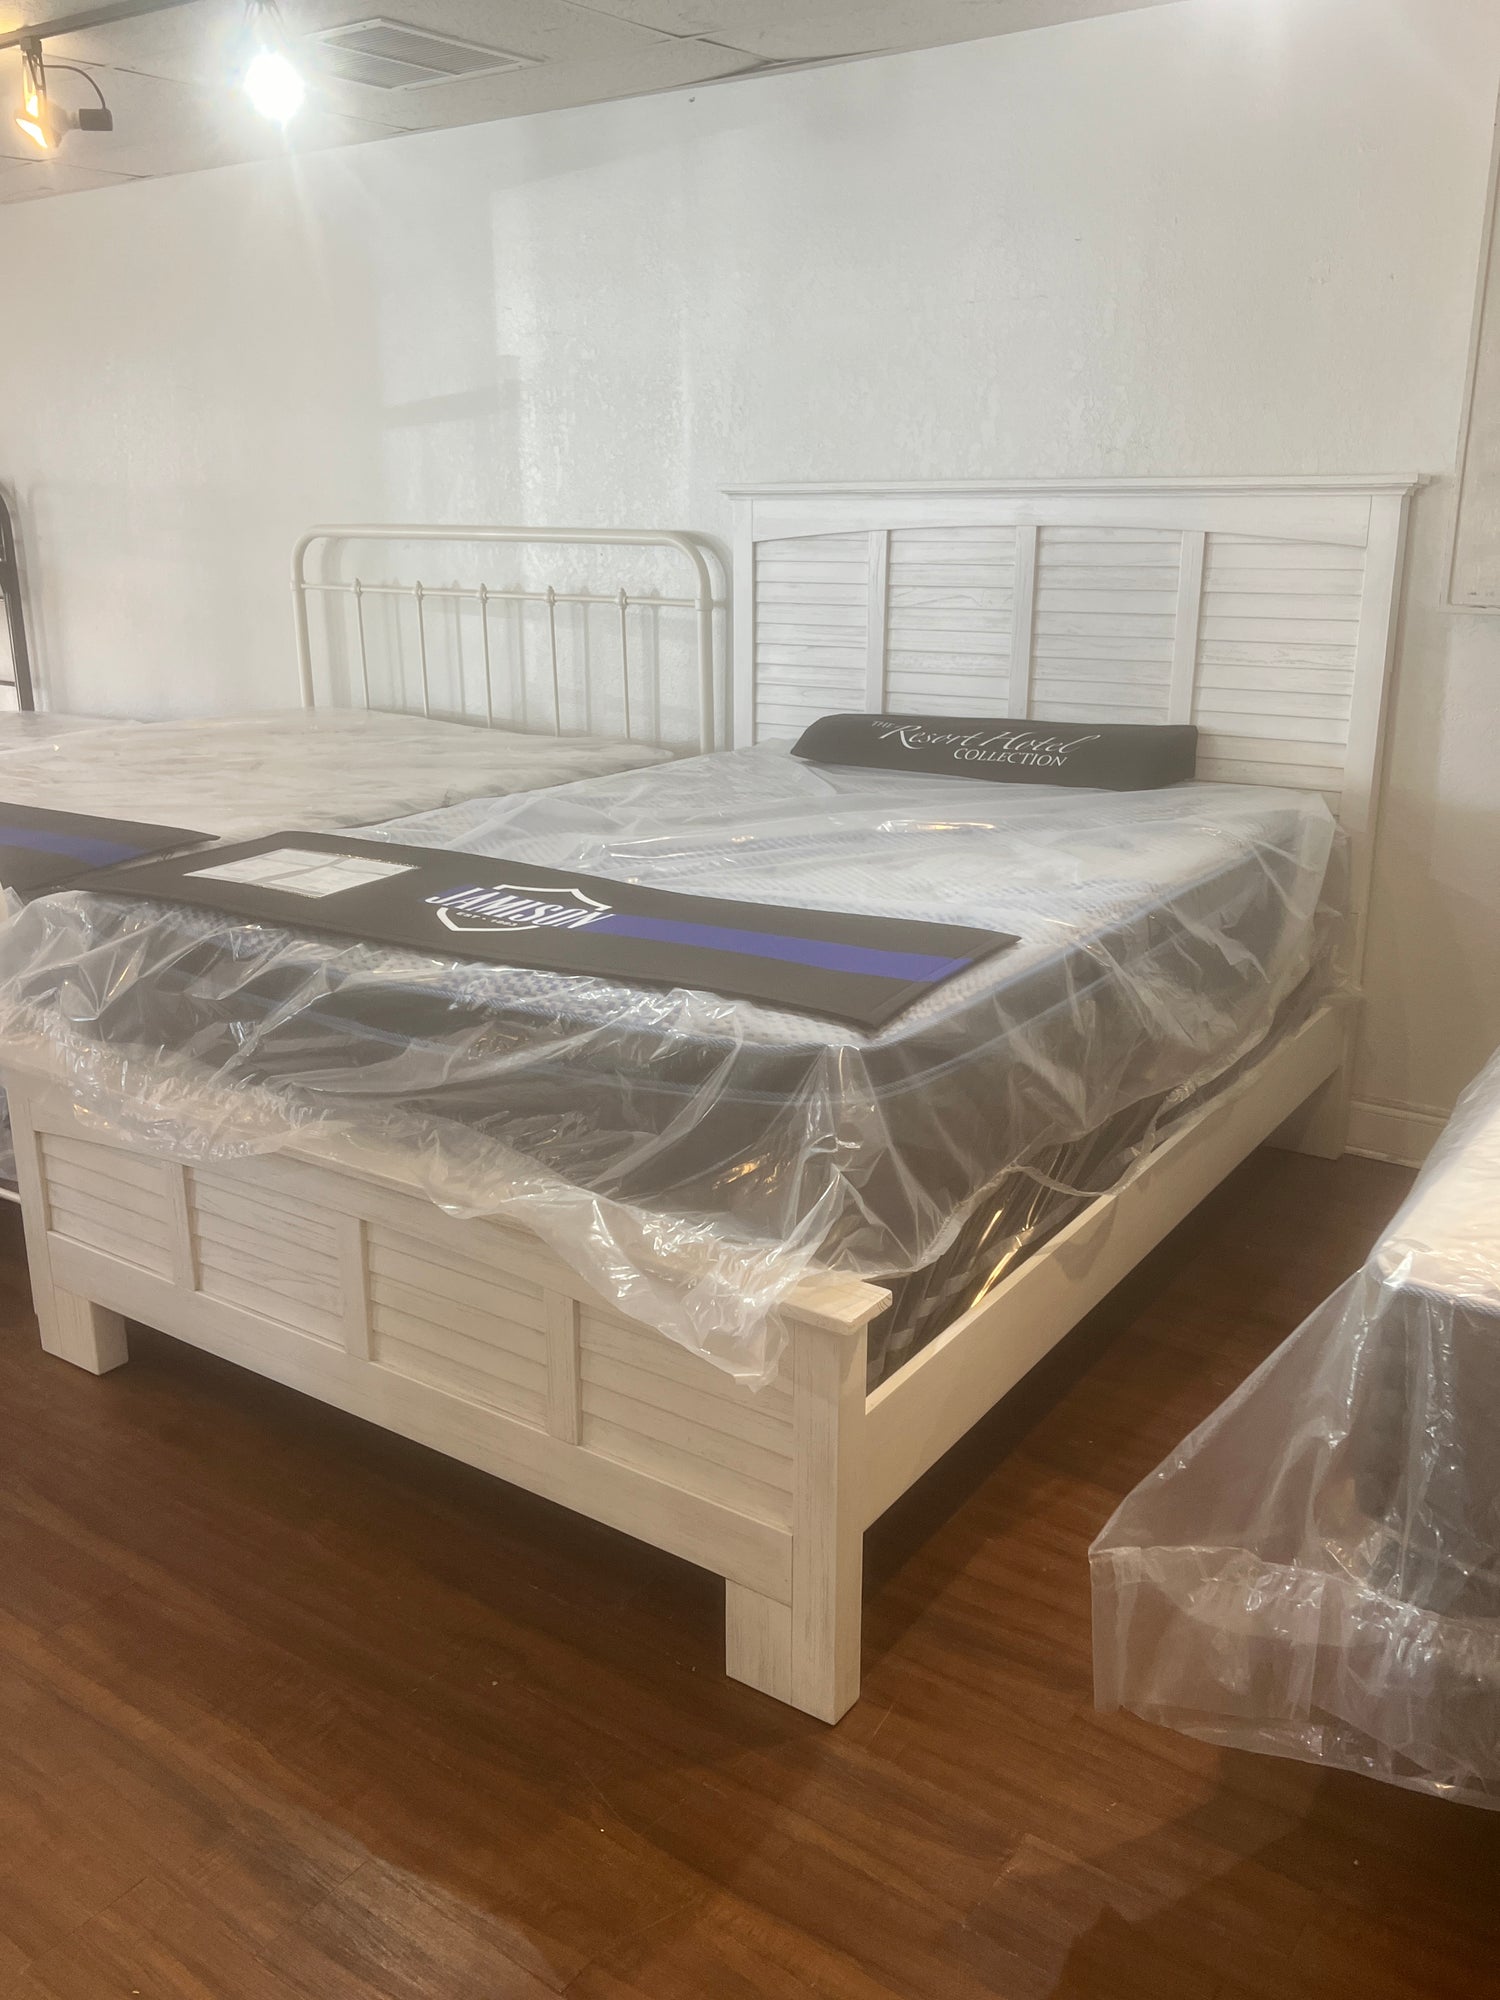 Brand New, Made in USA, Jamison Quality Mattresses for LESS.